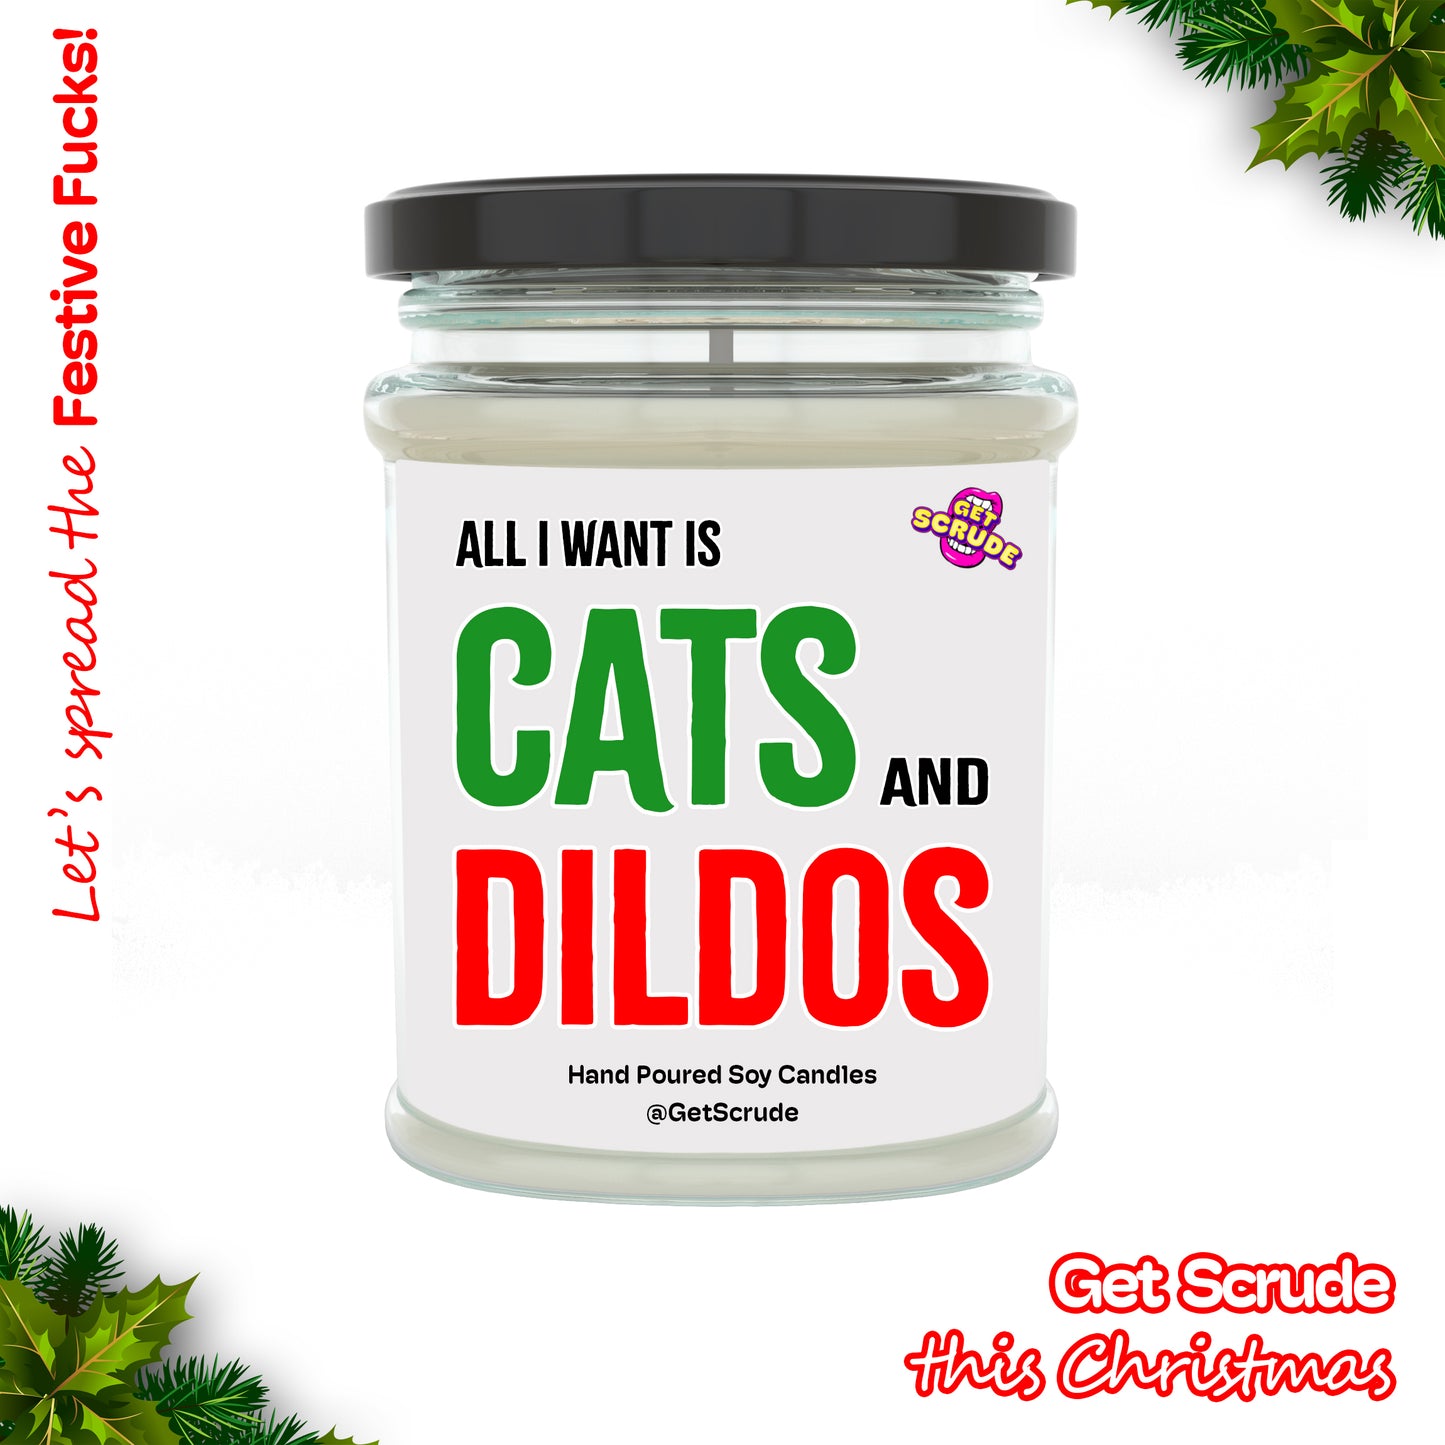 All I want for Christmas (CATS & DILDOS)